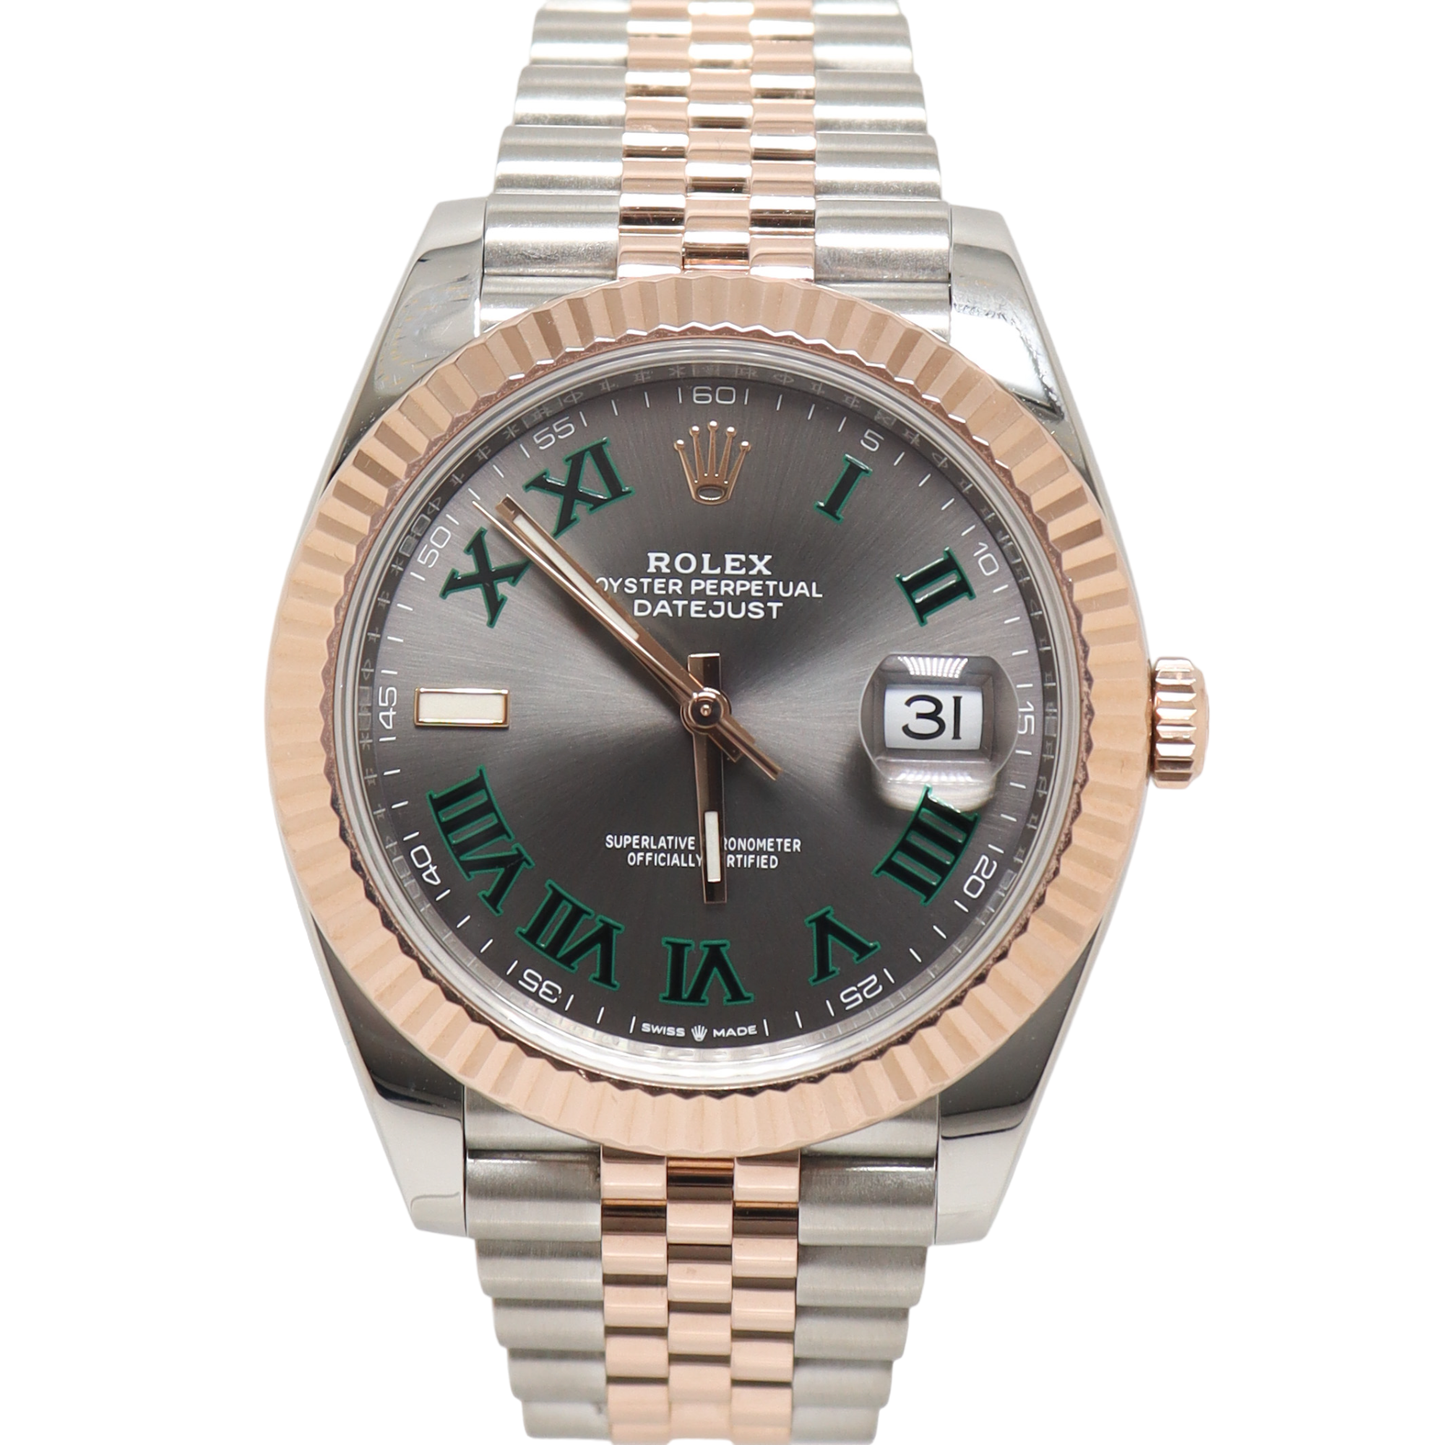 Rolex Datejust 41mm Rose Gold & Stainless Steel Wimbledon Dial Watch Reference #: 126331